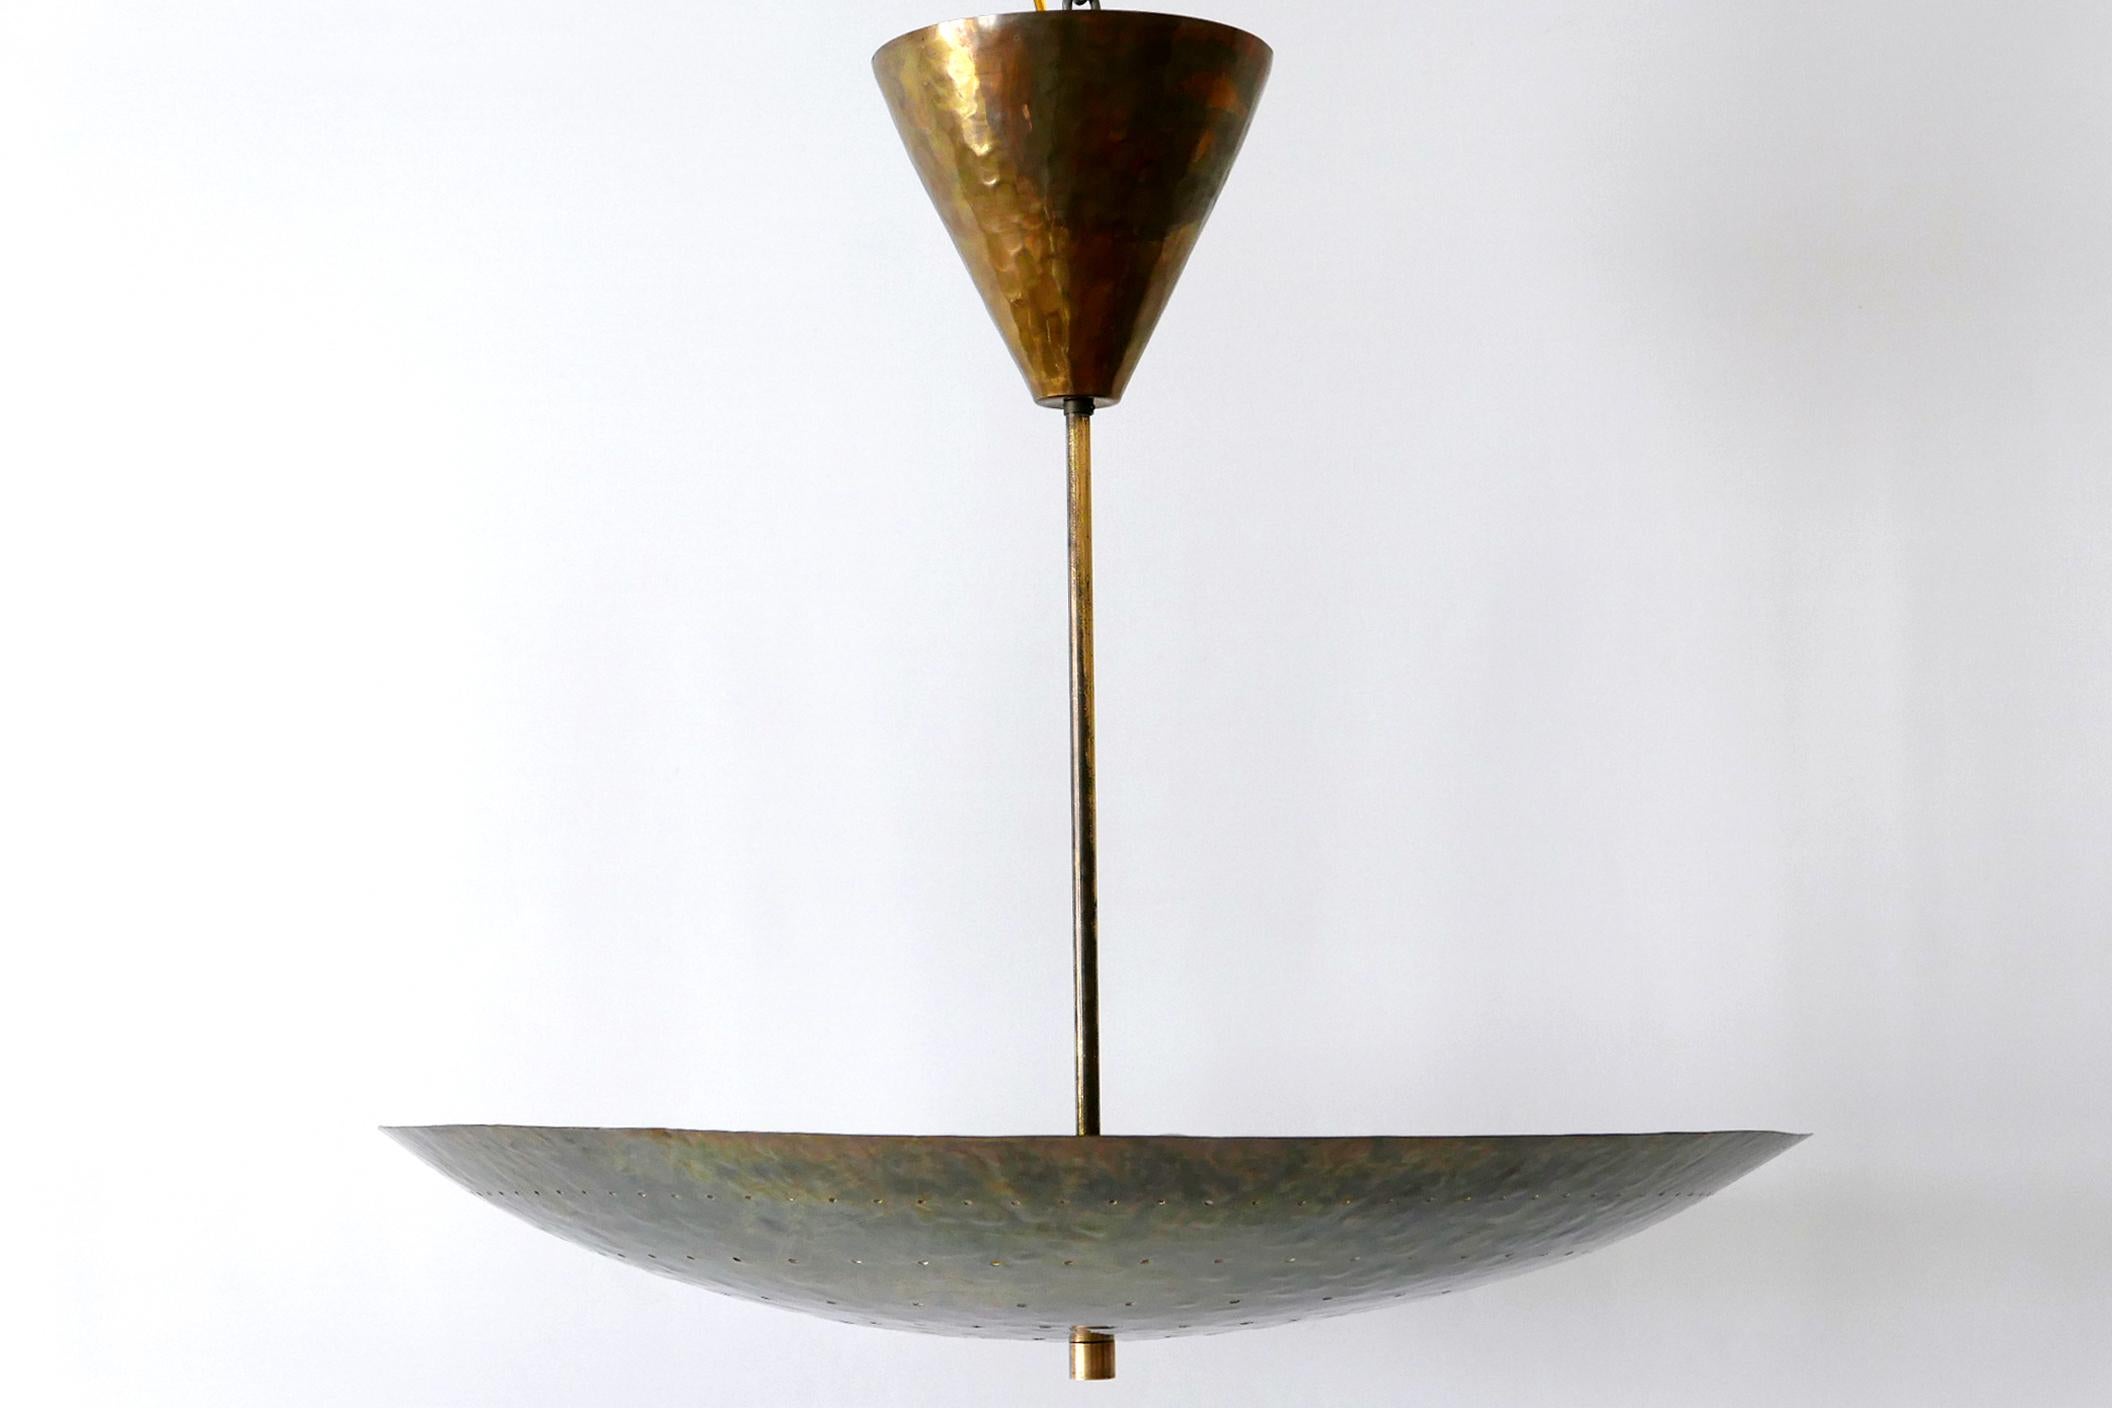 Hammered Huge Mid-Century Modern Perforated Brass Chandelier Pendant Lamp, 1950s, Germany